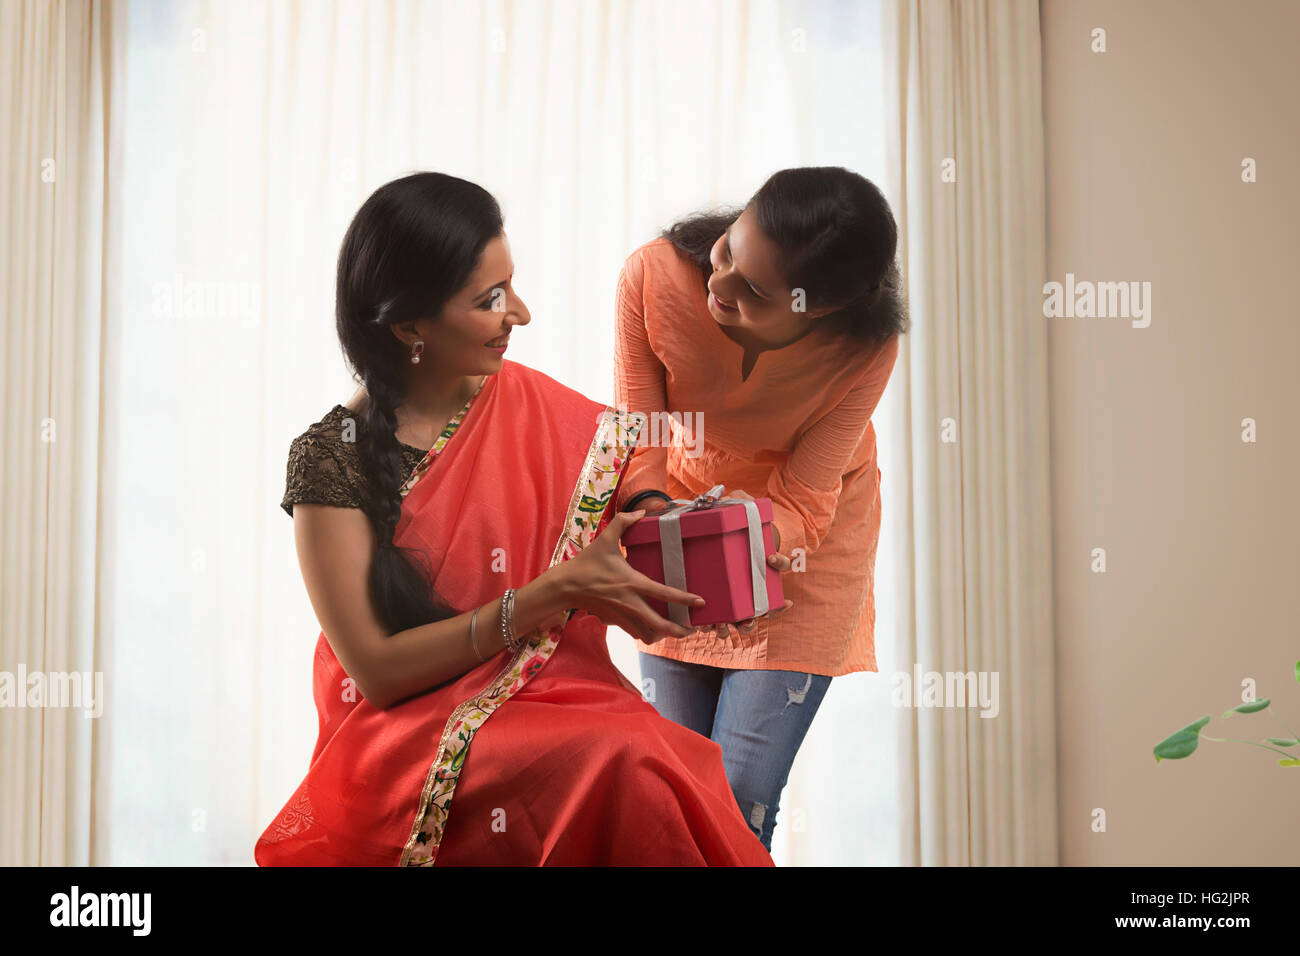 Daughter giving gift to her mother on mother's day Stock Photo